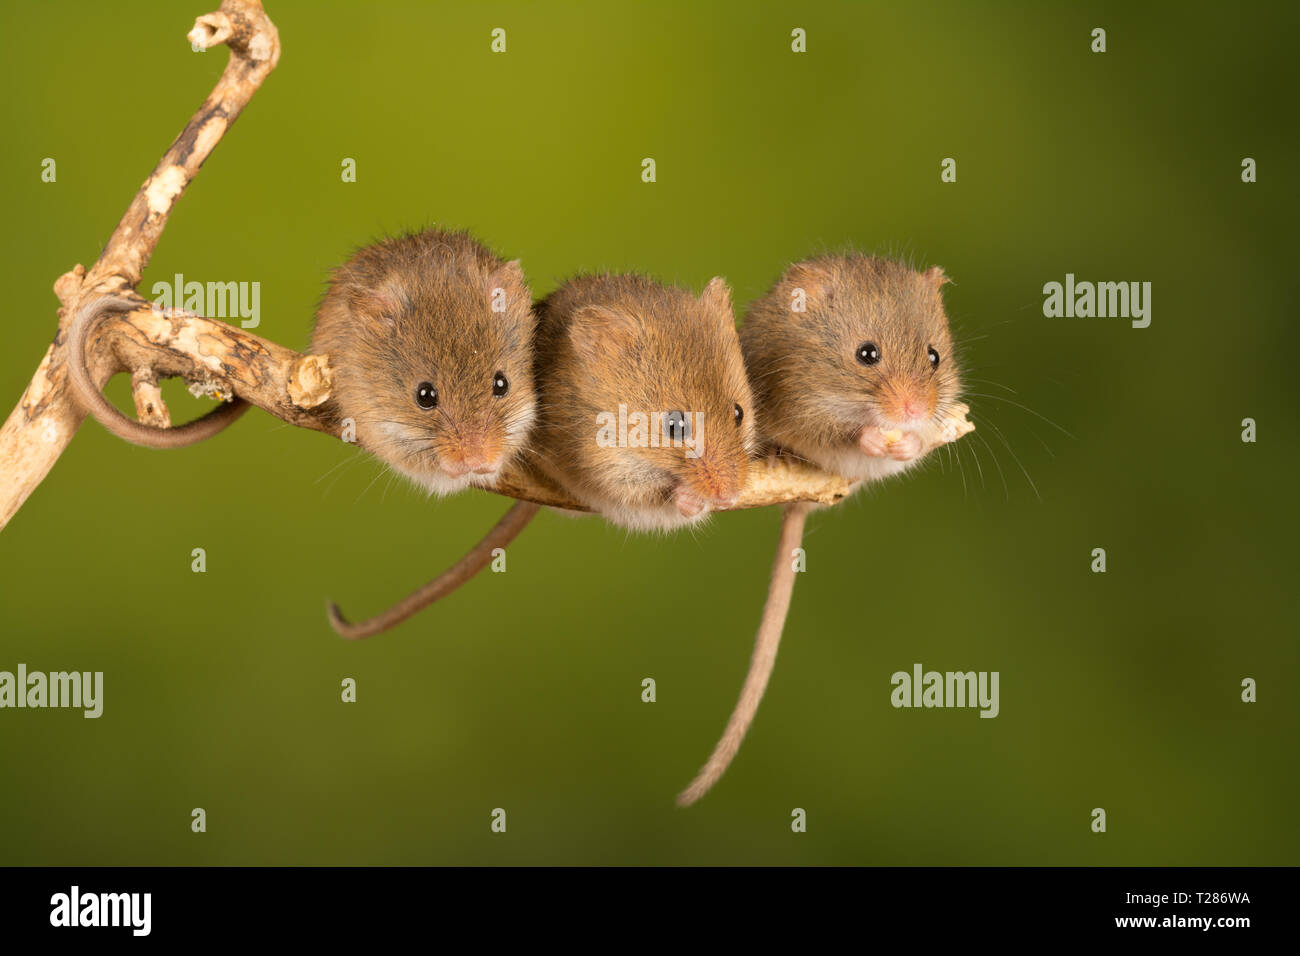 Three harvest mice (Micromys minutus), a small mammal or rodent species. Cute animals. Stock Photo